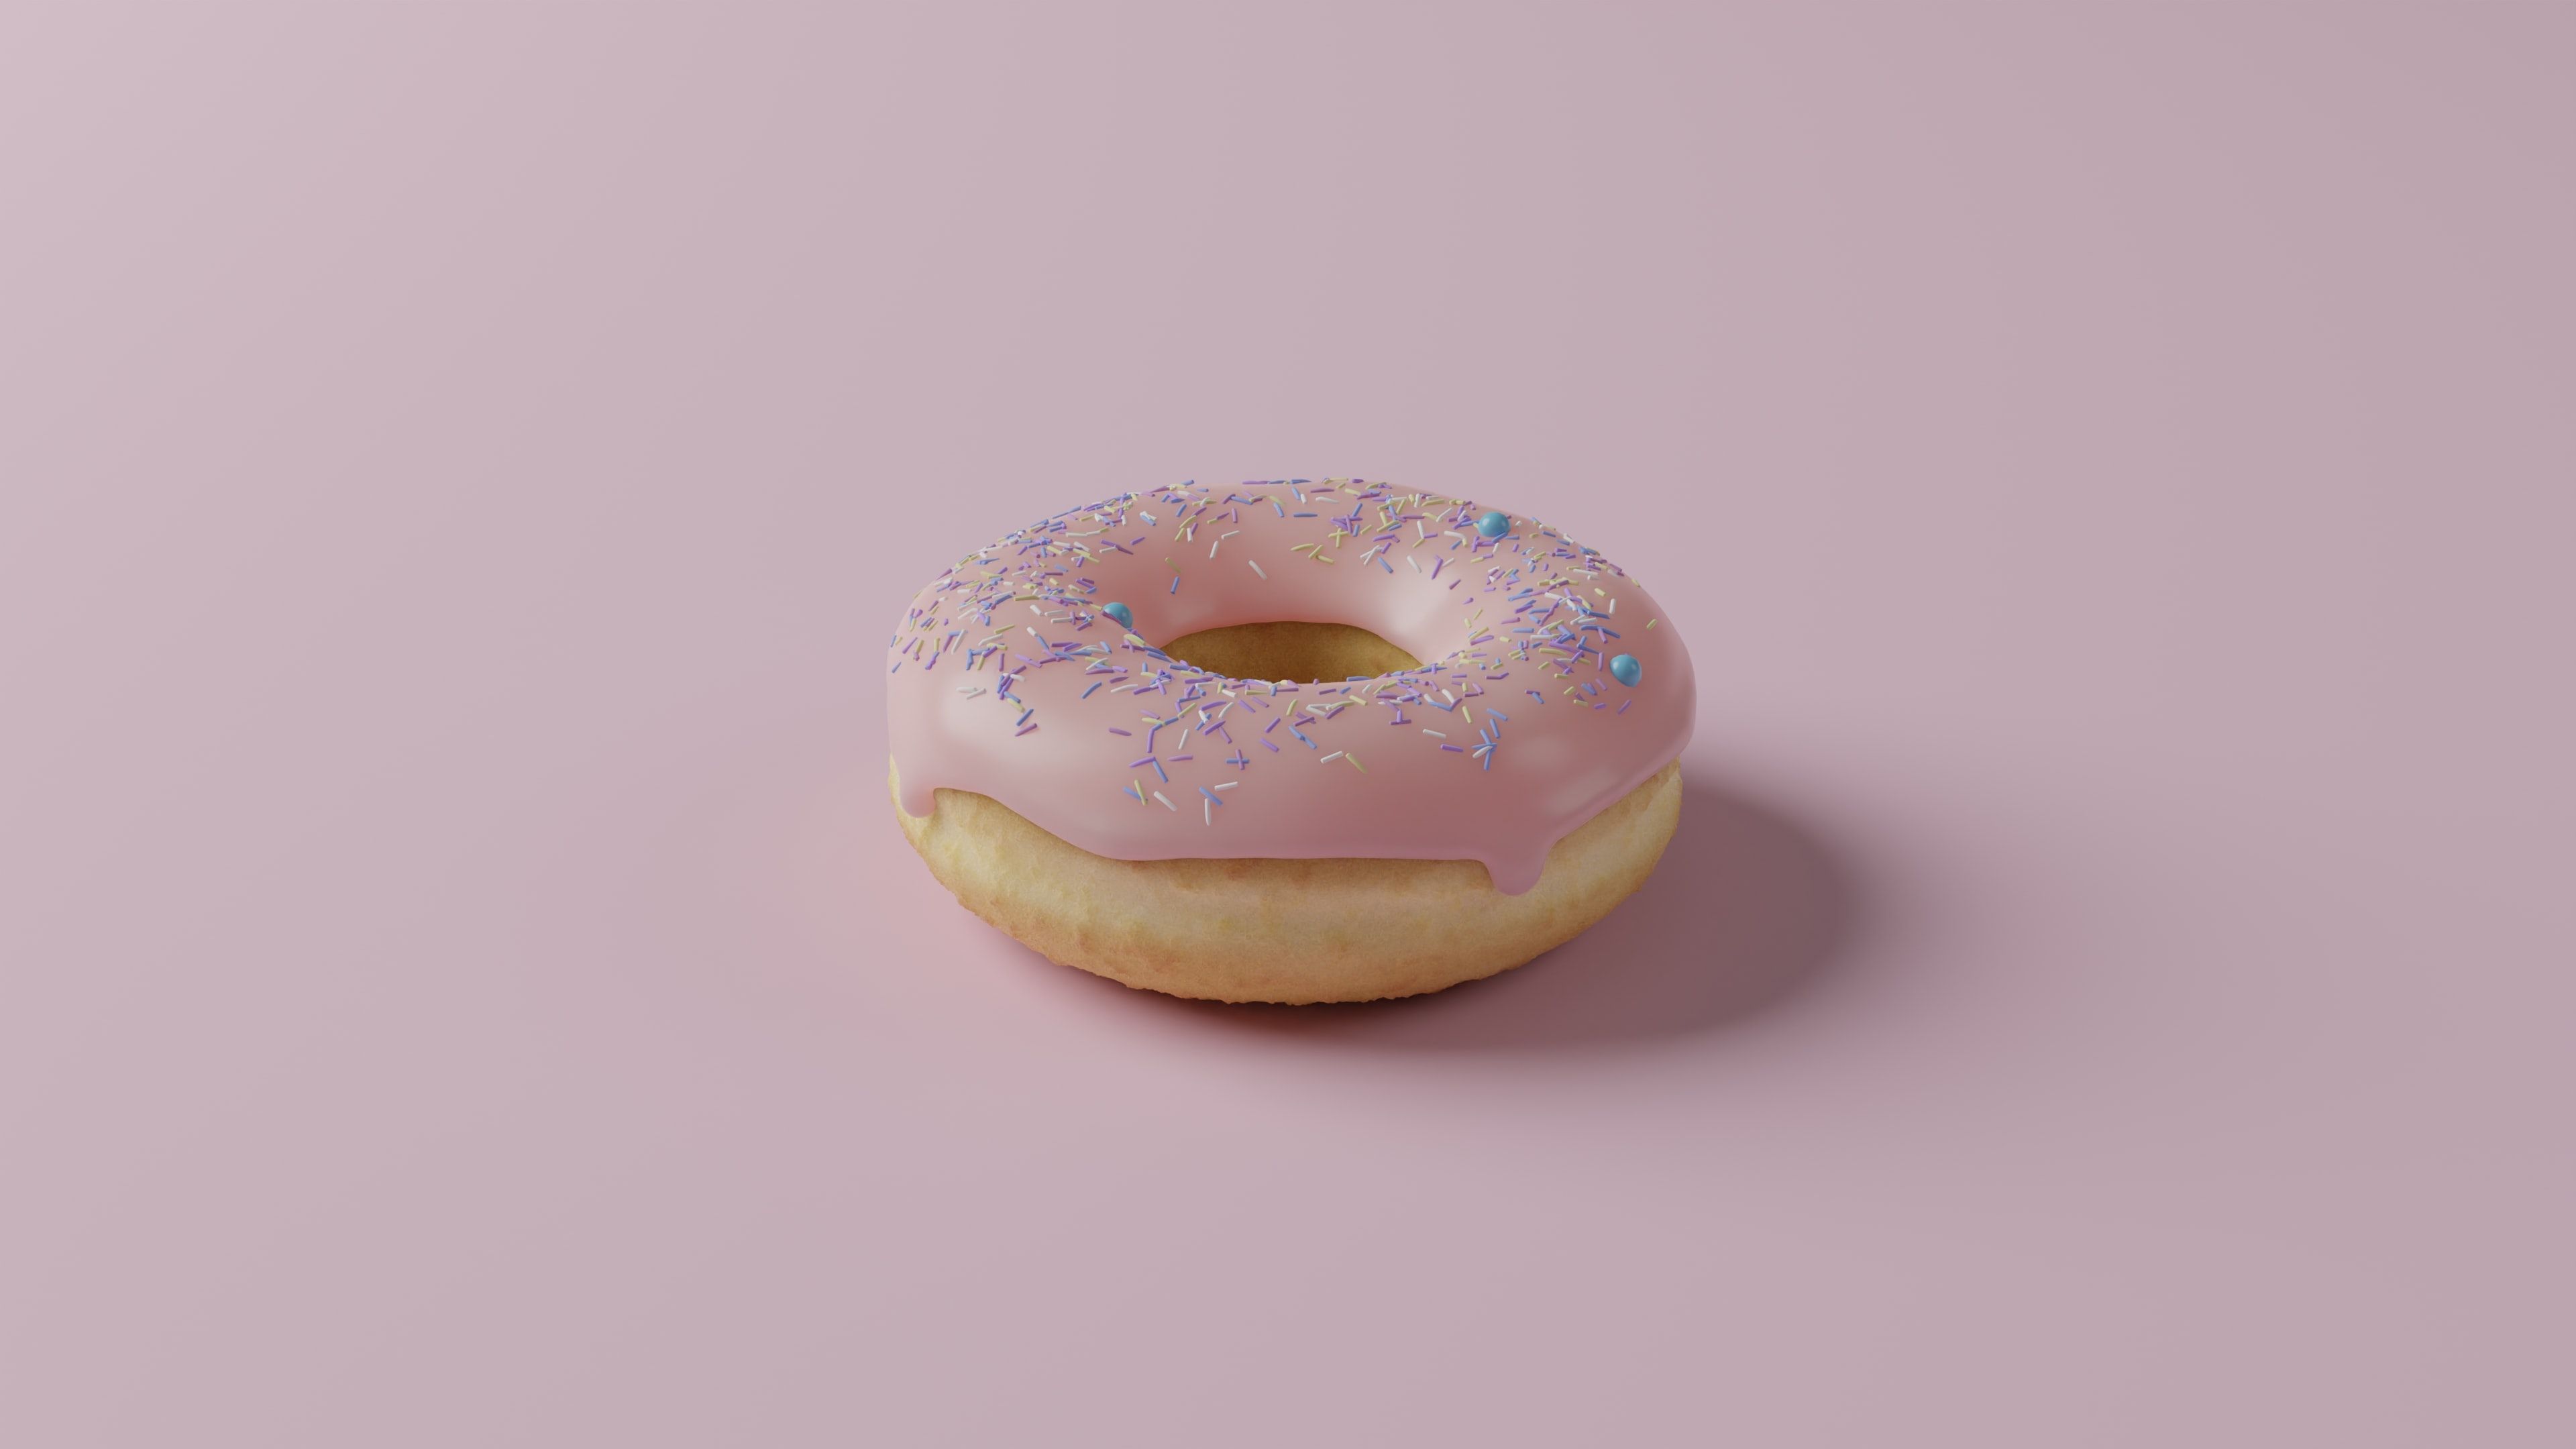 3D model of donut with pink frosting and sprinkles